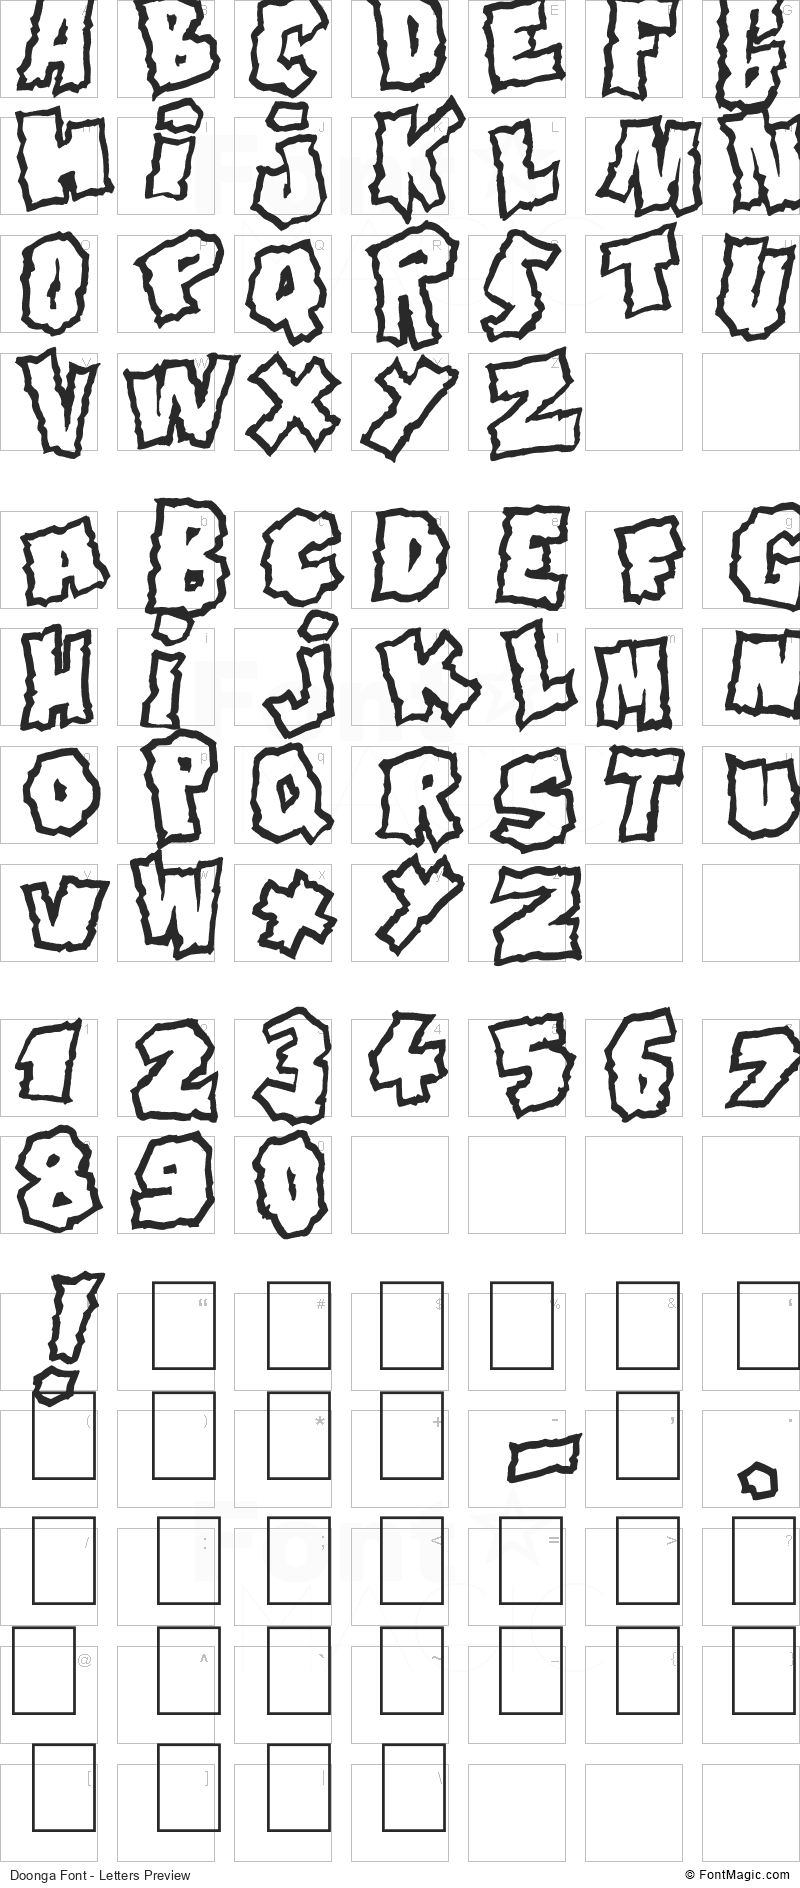 Doonga Font - All Latters Preview Chart